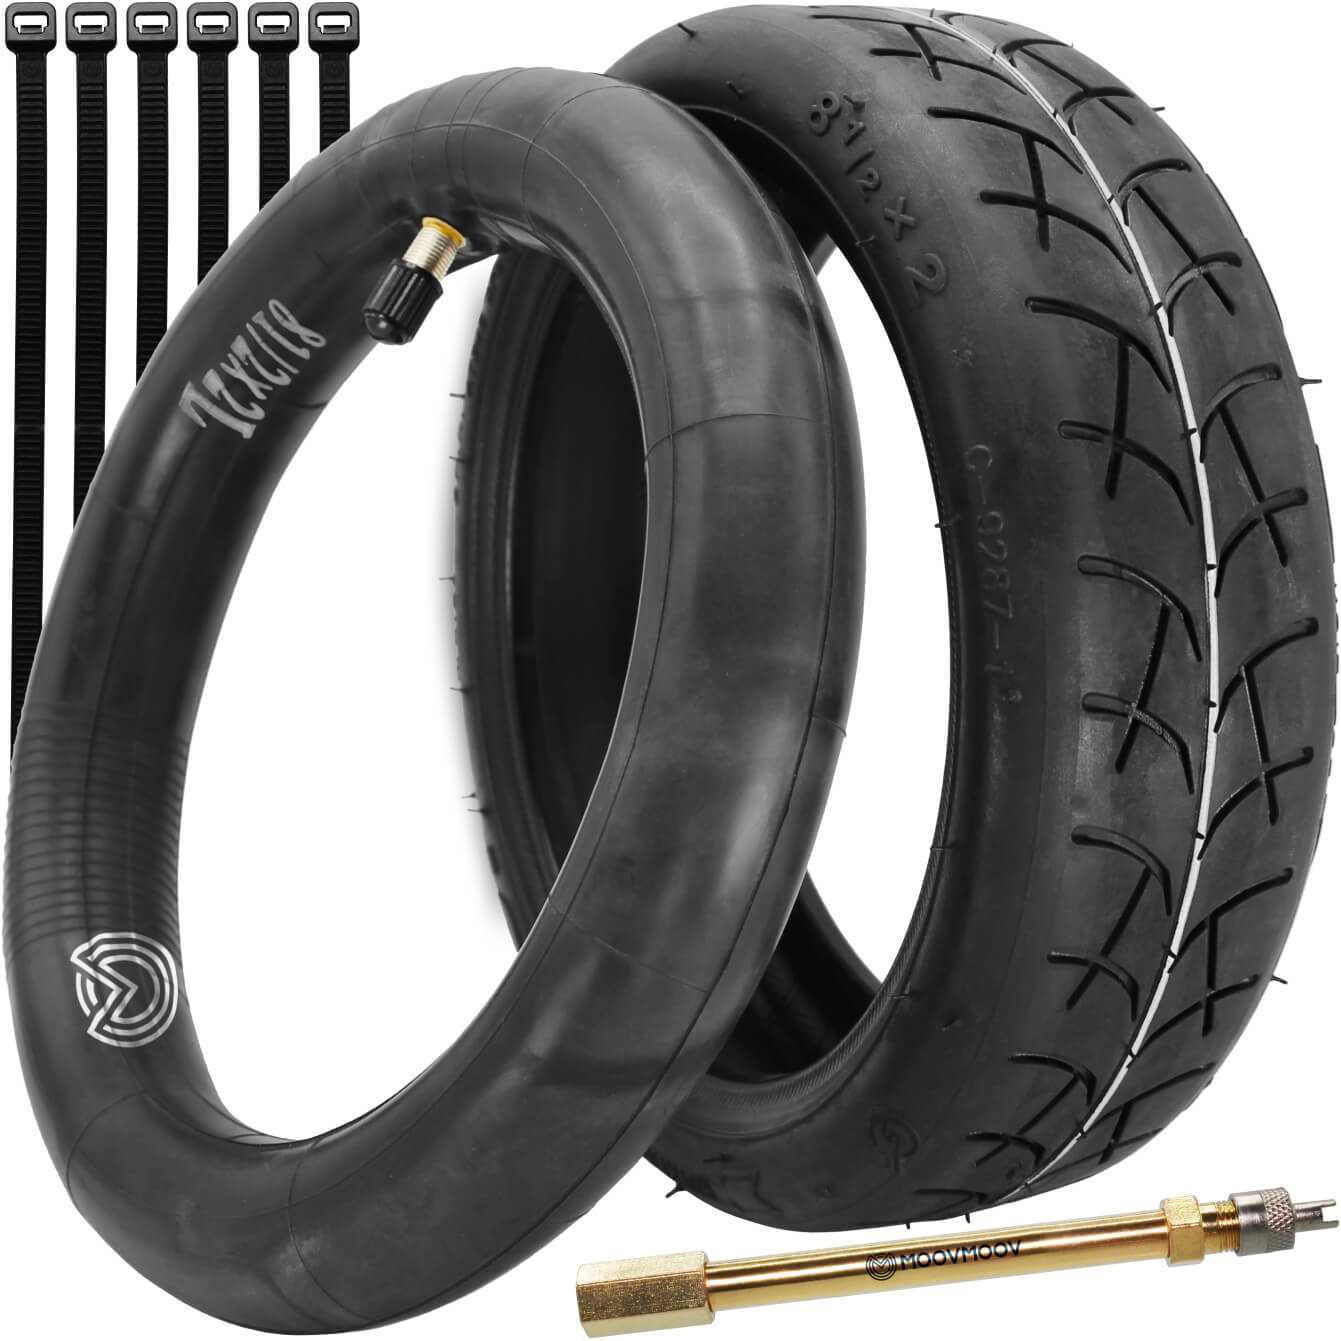 Tubeless Tire 8.5 x 3 for Xiaomi Scoooters model 1 tire CityRoad tubeless